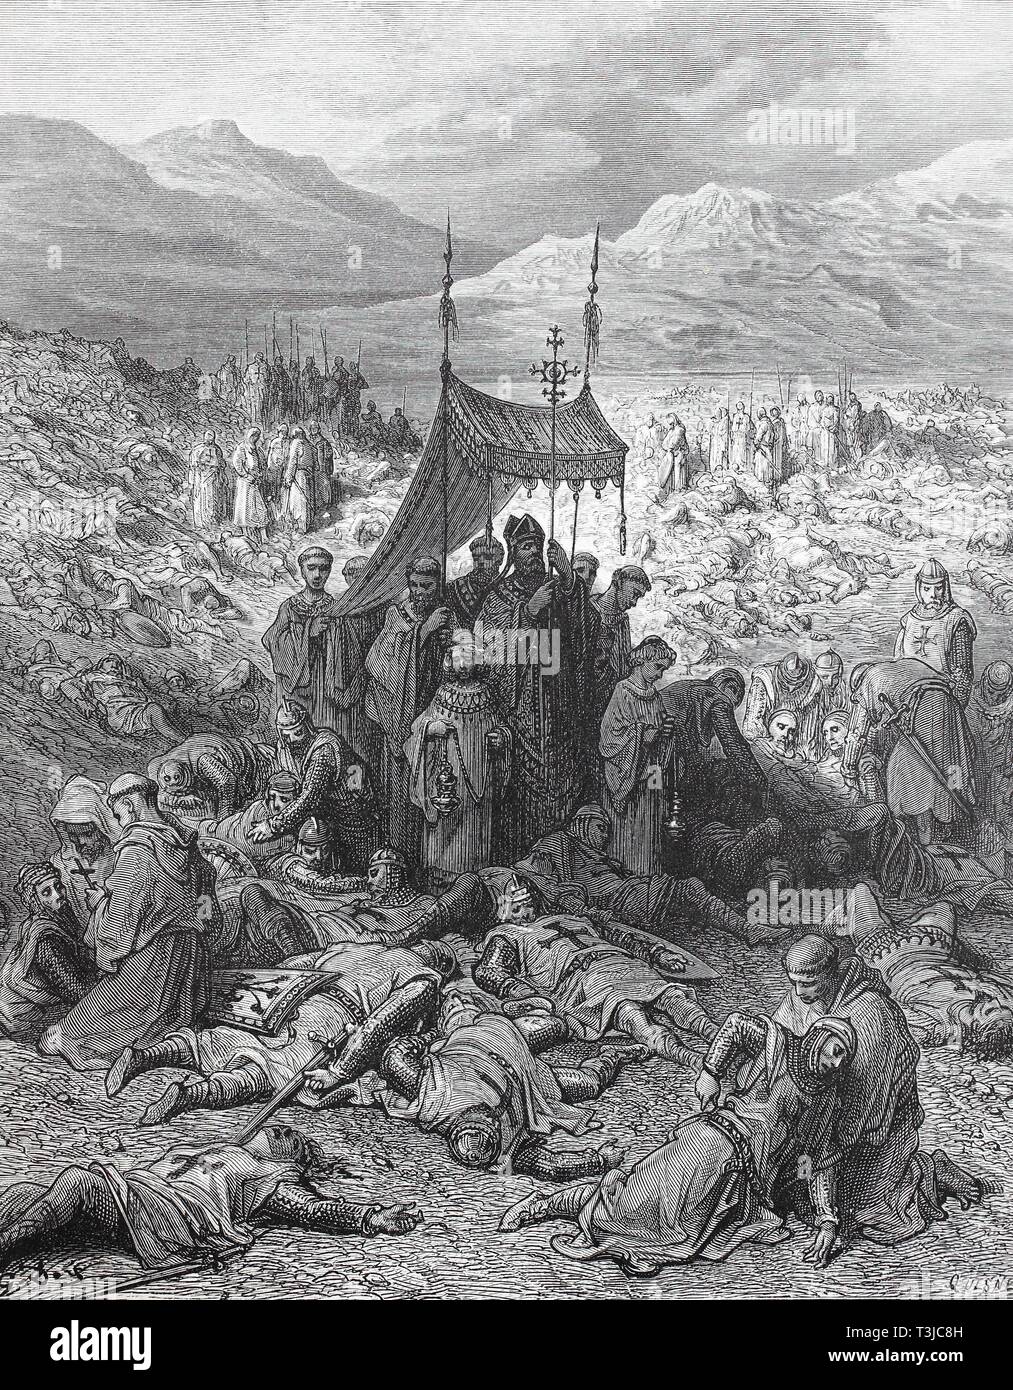 The Siege of Antioch during the First Crusade in 1097 and 1098, burial of the dead soldiers after the battle, historical illustration, 1880, Germany Stock Photo